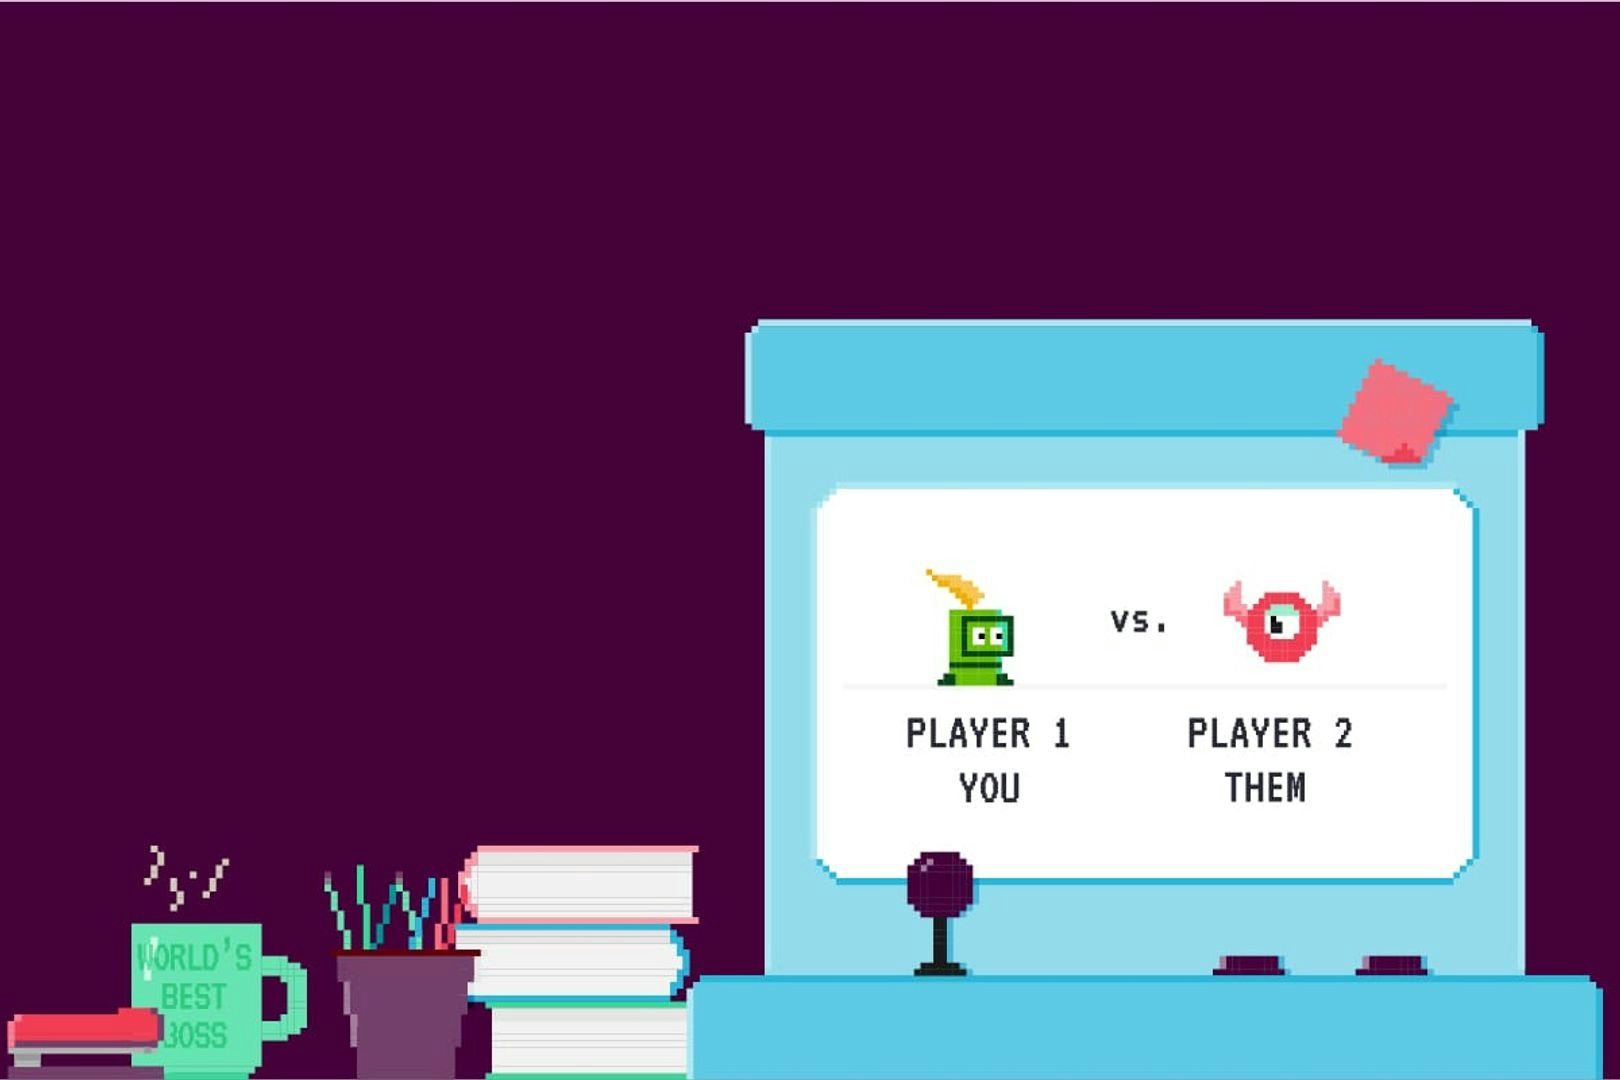 An illustration in the pixel art style of old arcade machines. The image shows several desktop items like a stapler, mug and books next to a large arcade cabinet which displays 'Player 1 'You' vs 'Player 2' Them' implying the reader versus their work enemy.